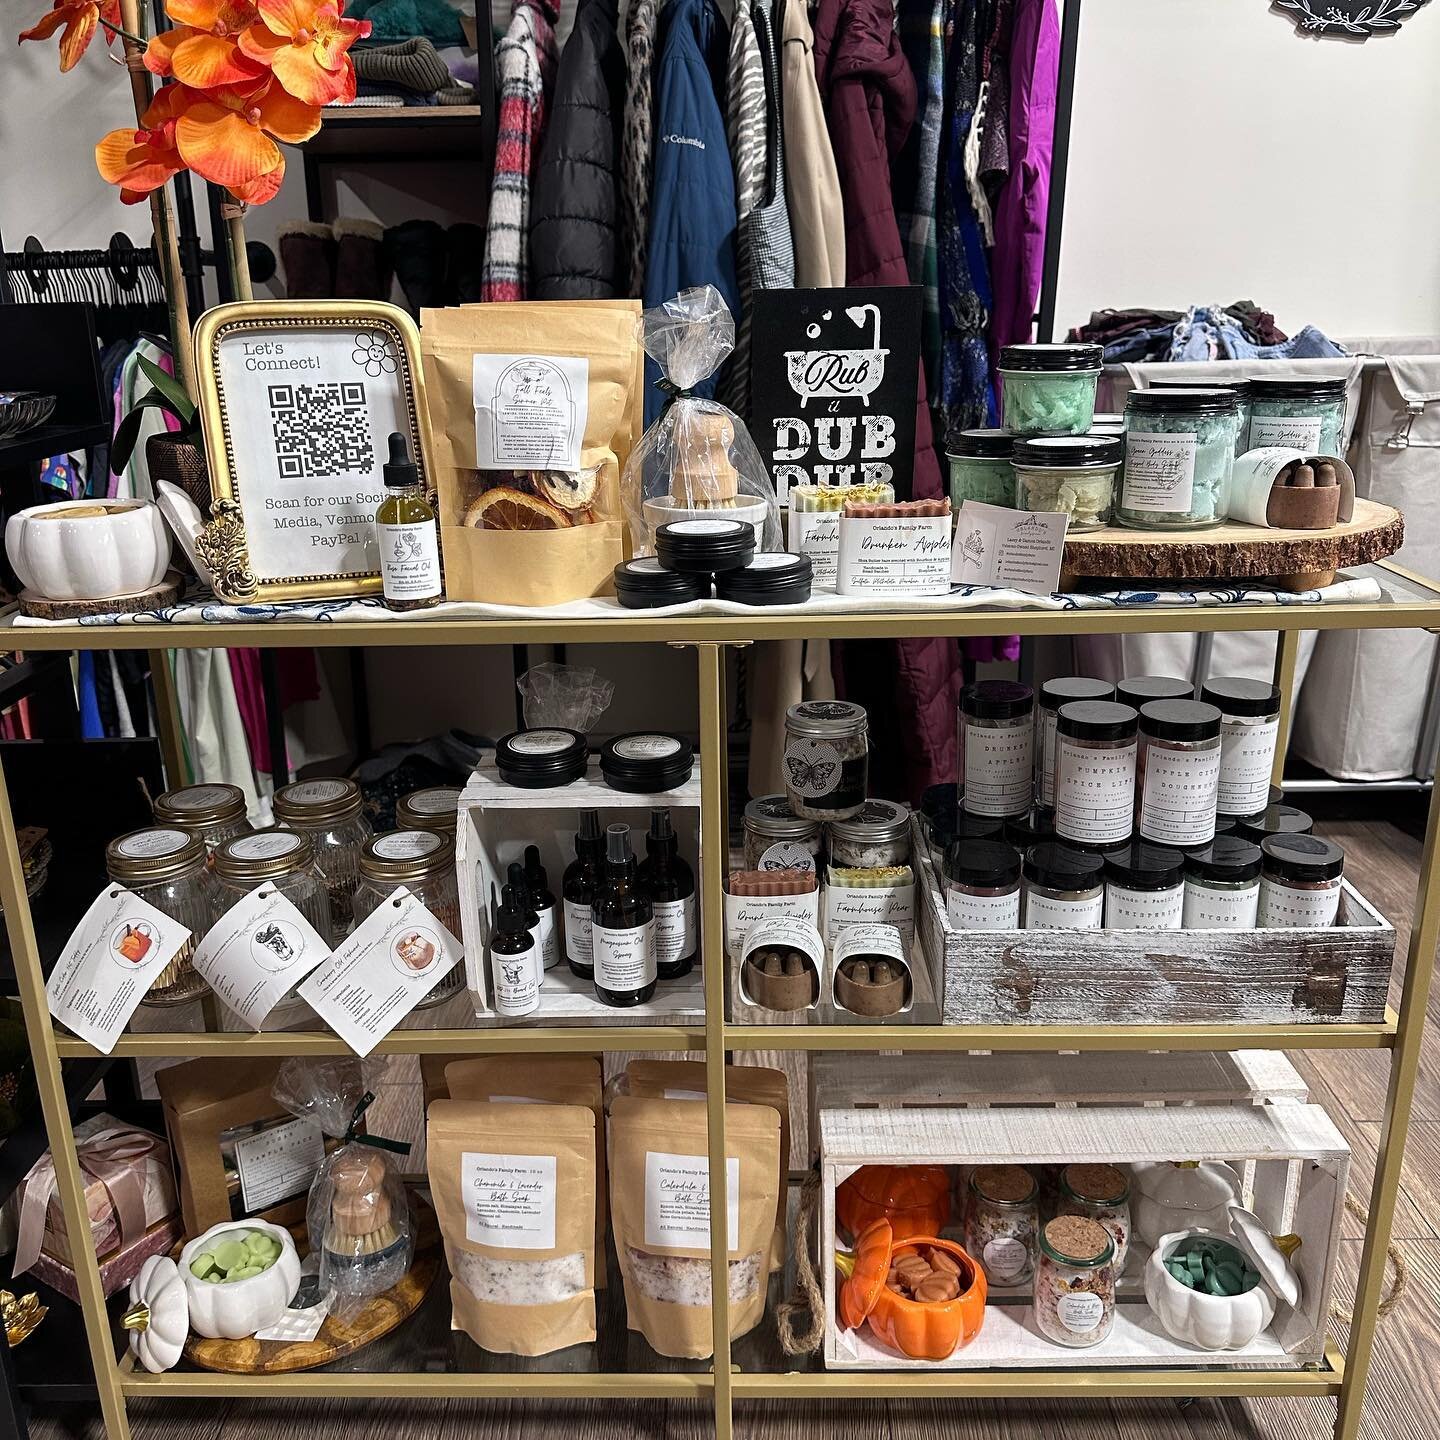 ✨This is our gorgeous new display @gracelynsgoodies ✨ You can now find some of our products at her beautiful consignment shop in downtown Shepherd! She literally has the cutest clothes &amp; accessories for women and men, so be sure to stop by and ch